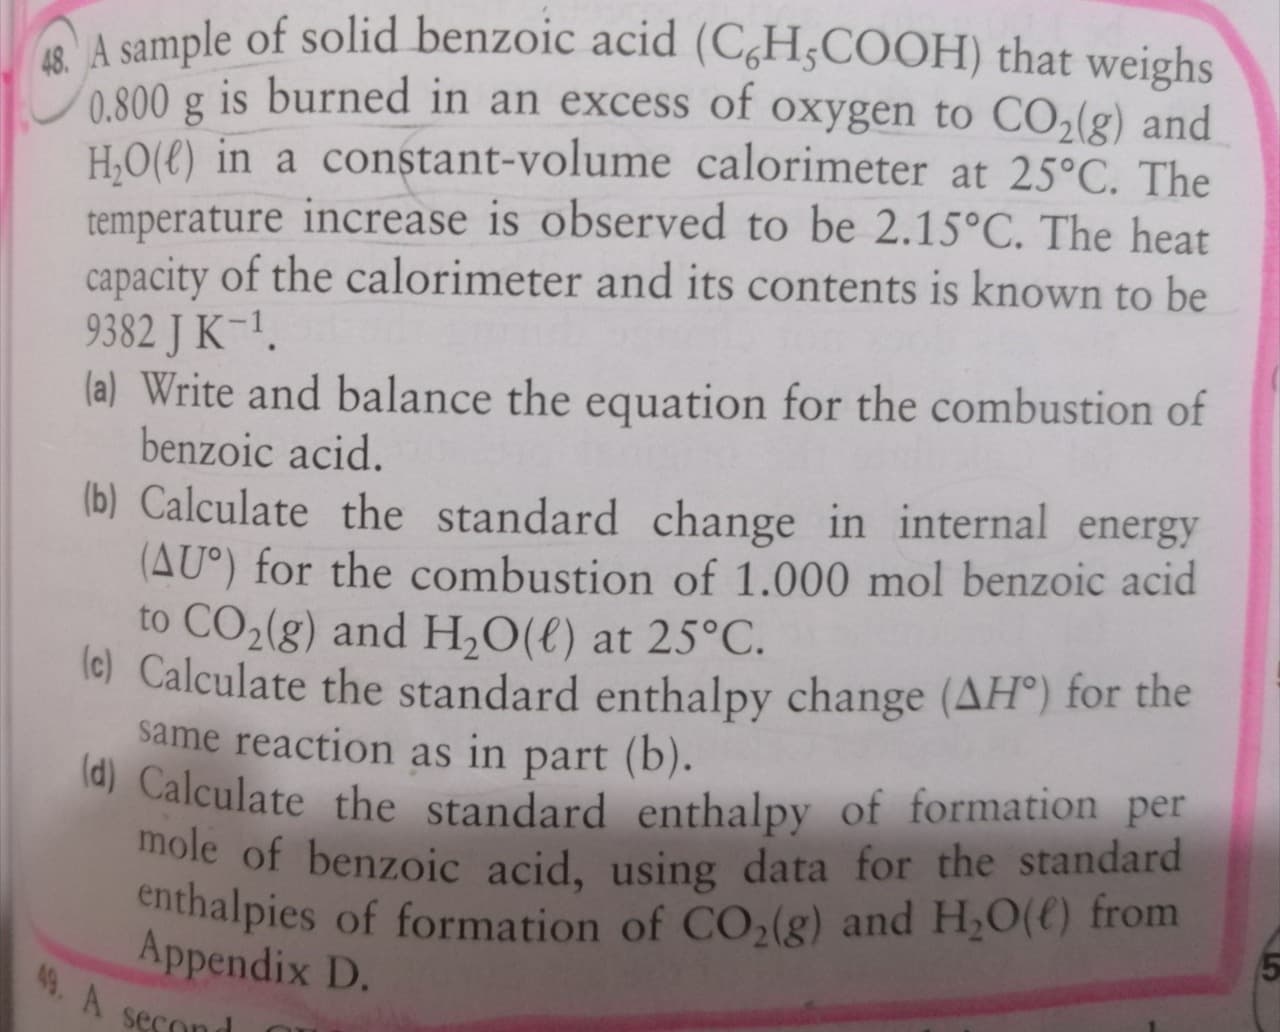 A sample of solid benzoic acid (C,H;COOH) that weighs
800 g is burned in an excess of oxygen to CO,(g) and
H,O(€) in a constant-volume calorimeter at 25°C. The
temperature increase is observed to be 2.15°C. The heat
capacity of the calorimeter and its contents is known to be
9382 J K-1.
(a) Write and balance the equation for the combustion of
benzoic acid.
(b) Calculate the standard change in internal energy
(AU°) for the combustion of 1.000 mol benzoic acid
to CO2(g) and H,O(€) at 25°C.
lc) Calculate the standard enthalpy change (AH°) for the
same reaction as in part (b).
(d) Calculate the standard enthalpy of formation per
mole of benzoic acid, using data for the standard
enthalpies of formation of CO2(g) and H,O(() from
Appendix D.
